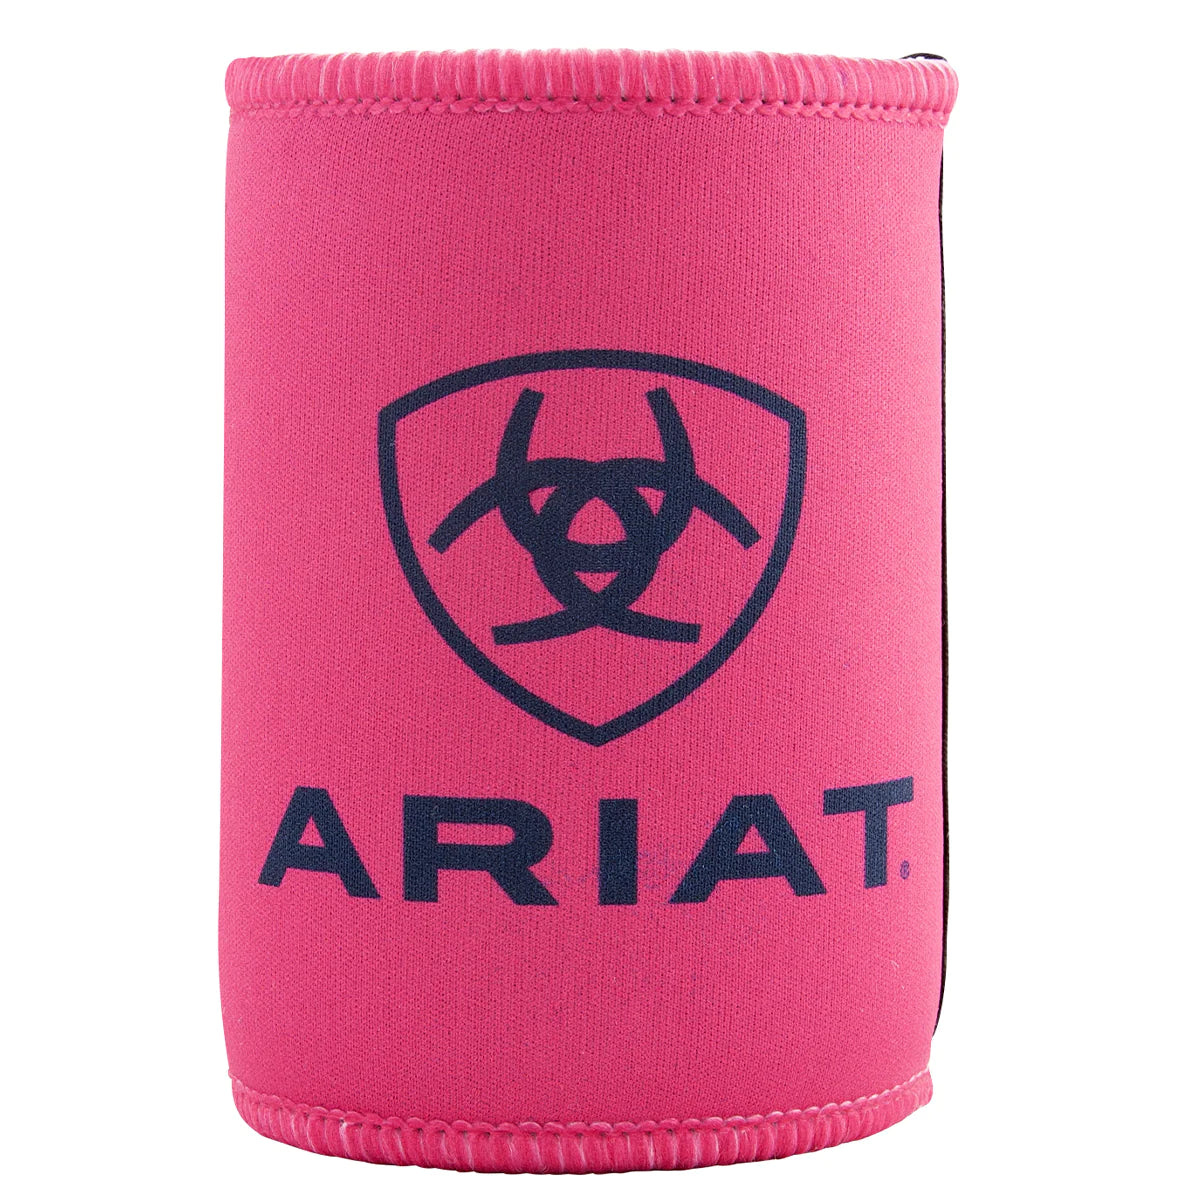 Ariat Stubby Holder - The Trading Stables